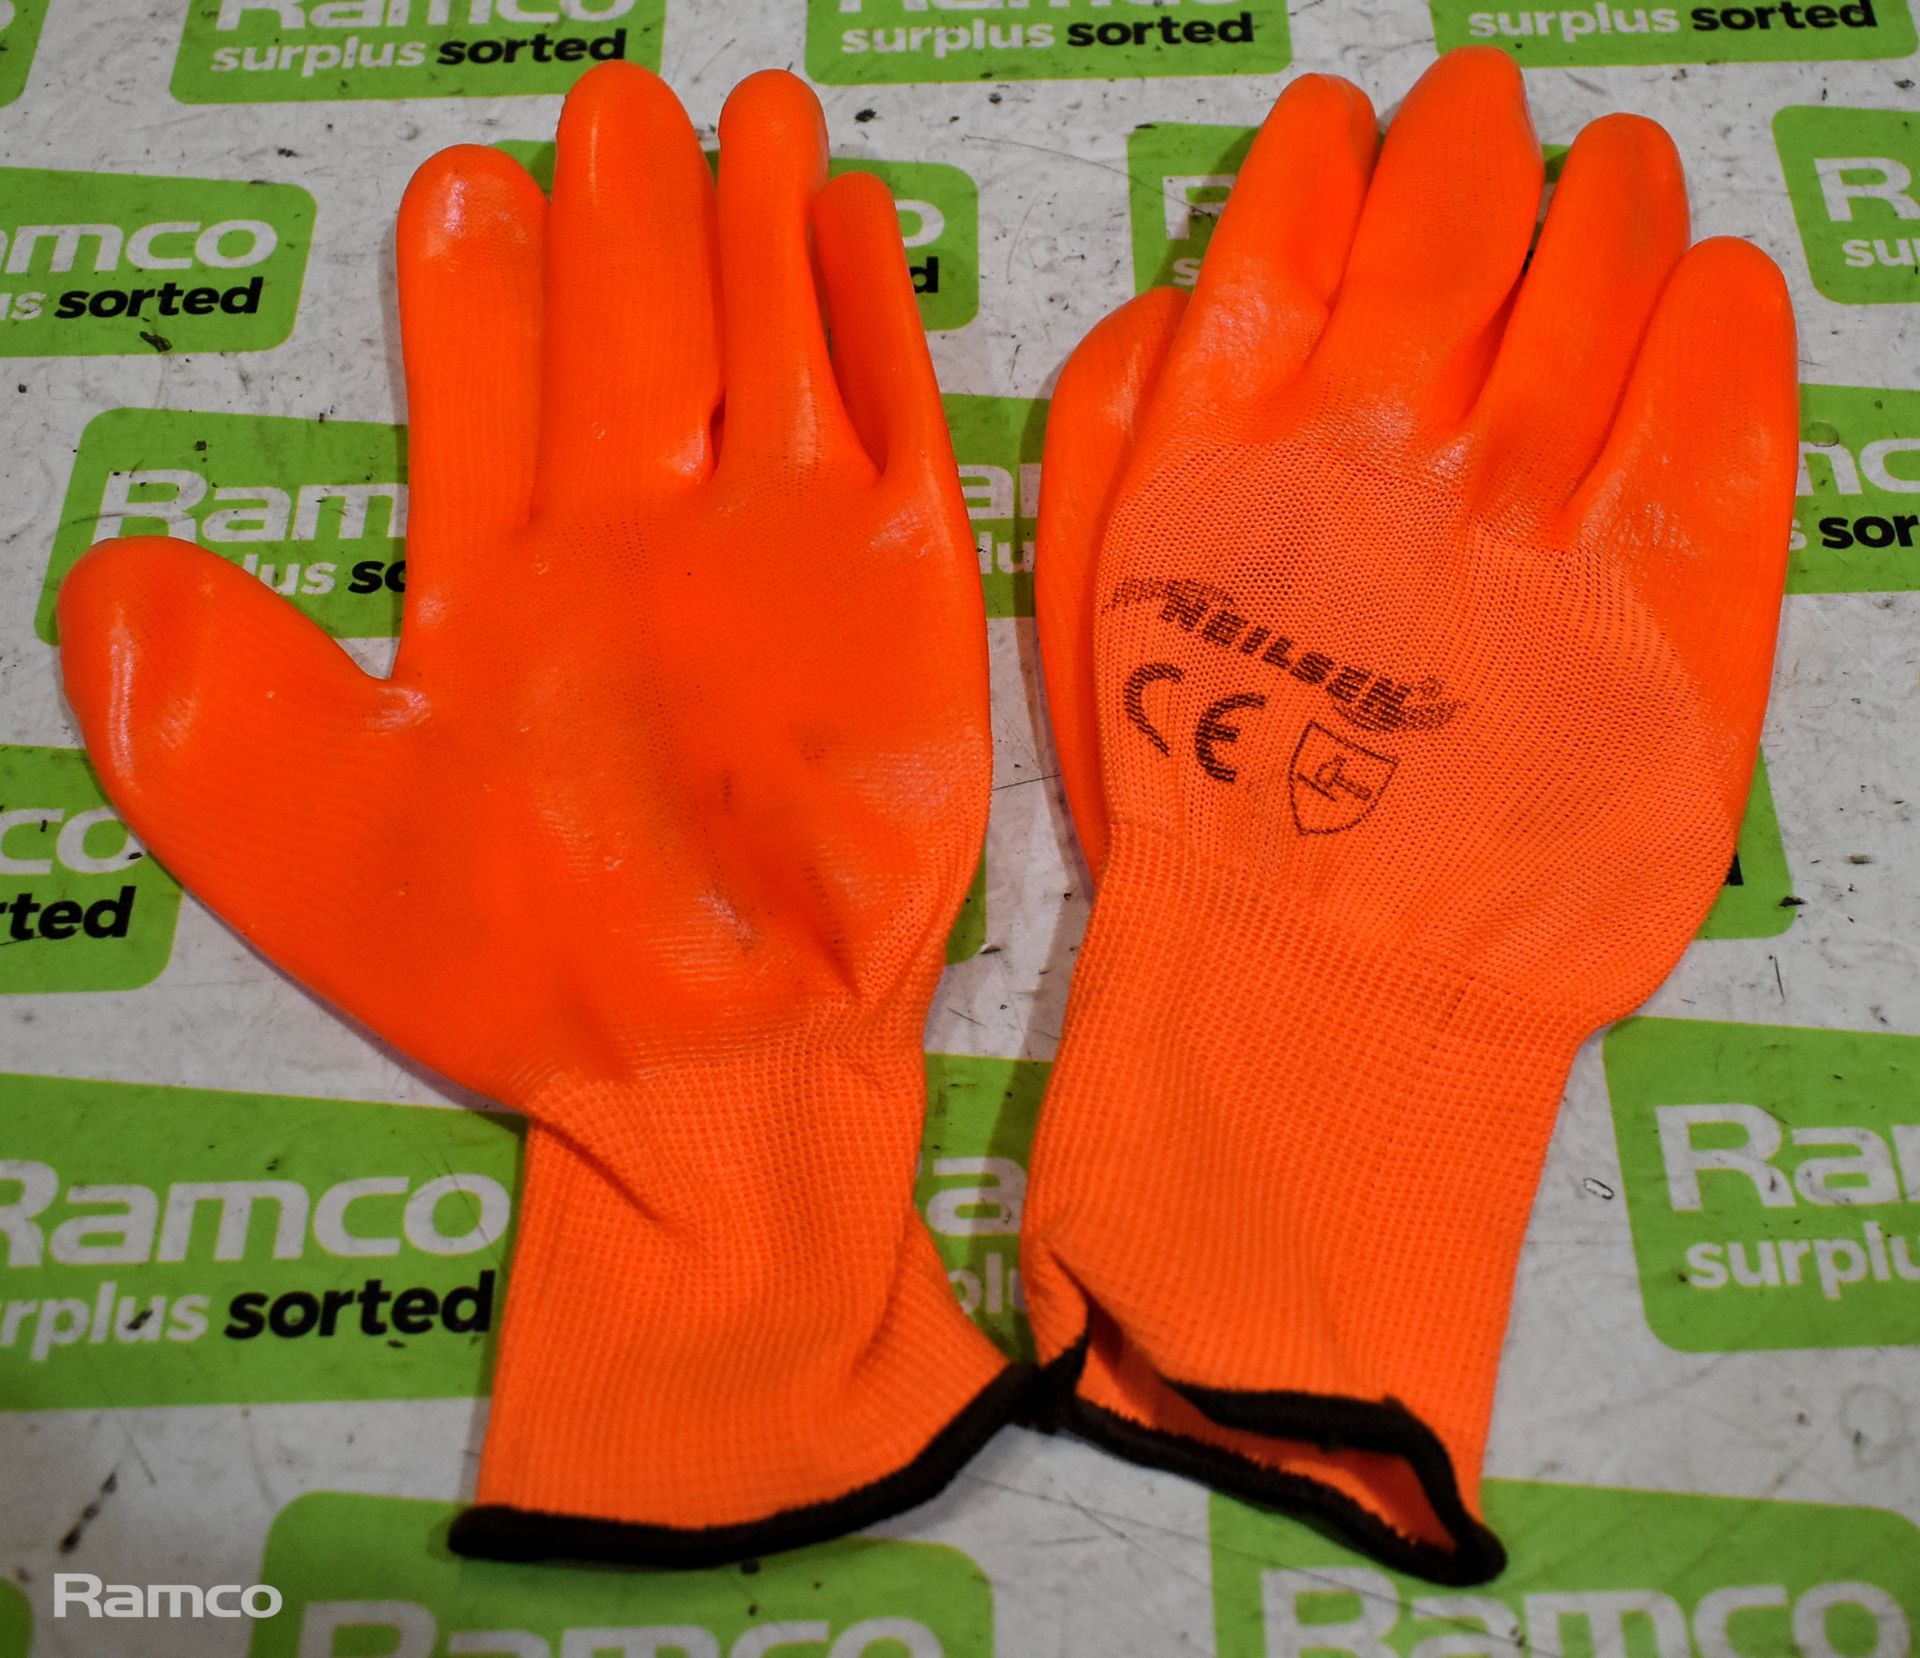 60x Pairs of Neilsen PVC work gloves - Image 2 of 4